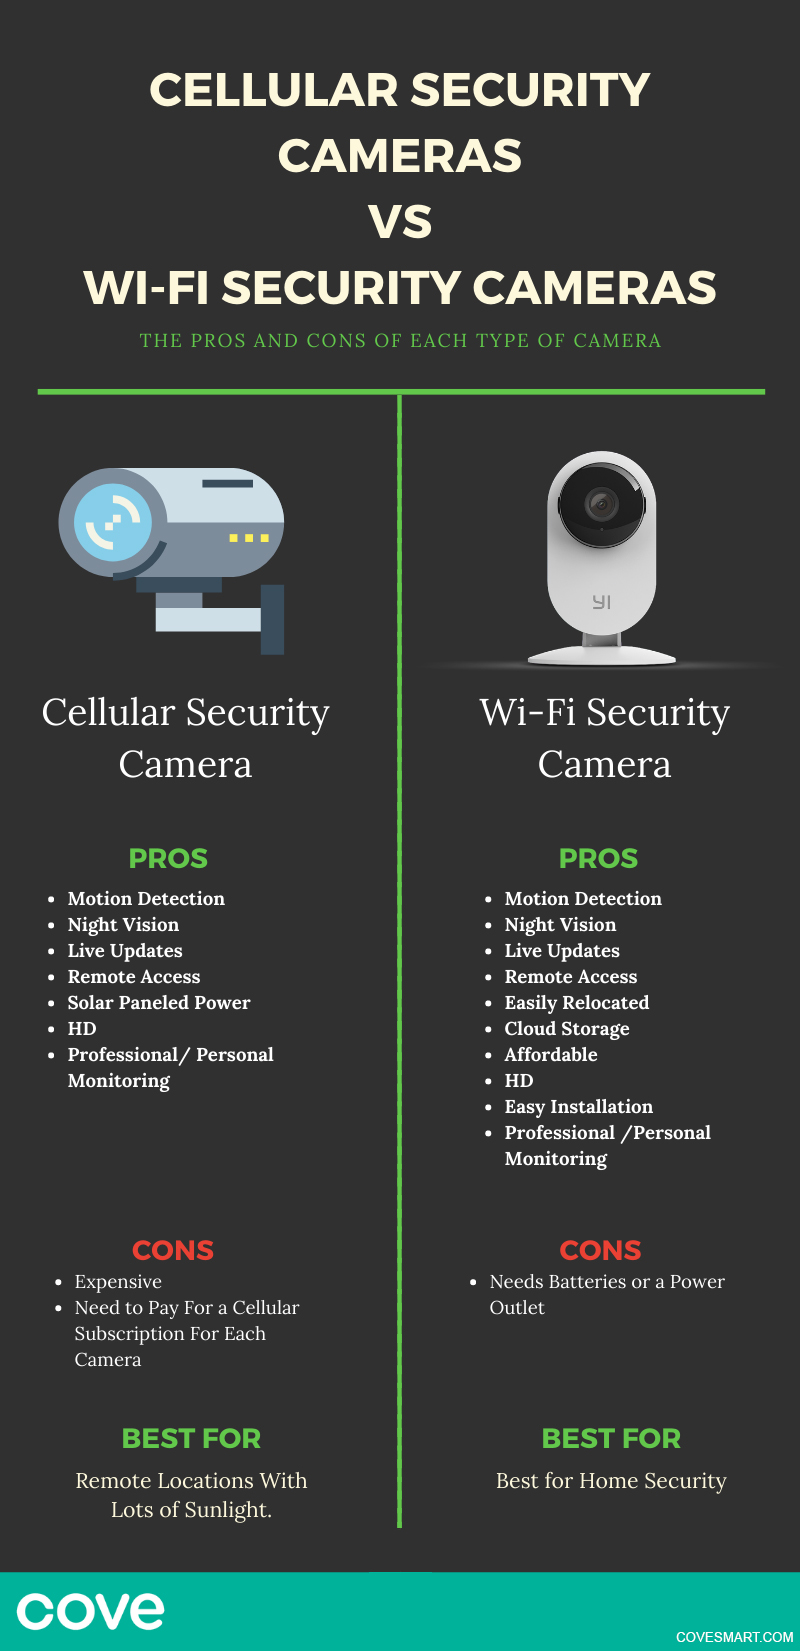 Cellular Security Cameras are expensive but good for remote locations. Wi-Fi Security Cameras are better for home security.